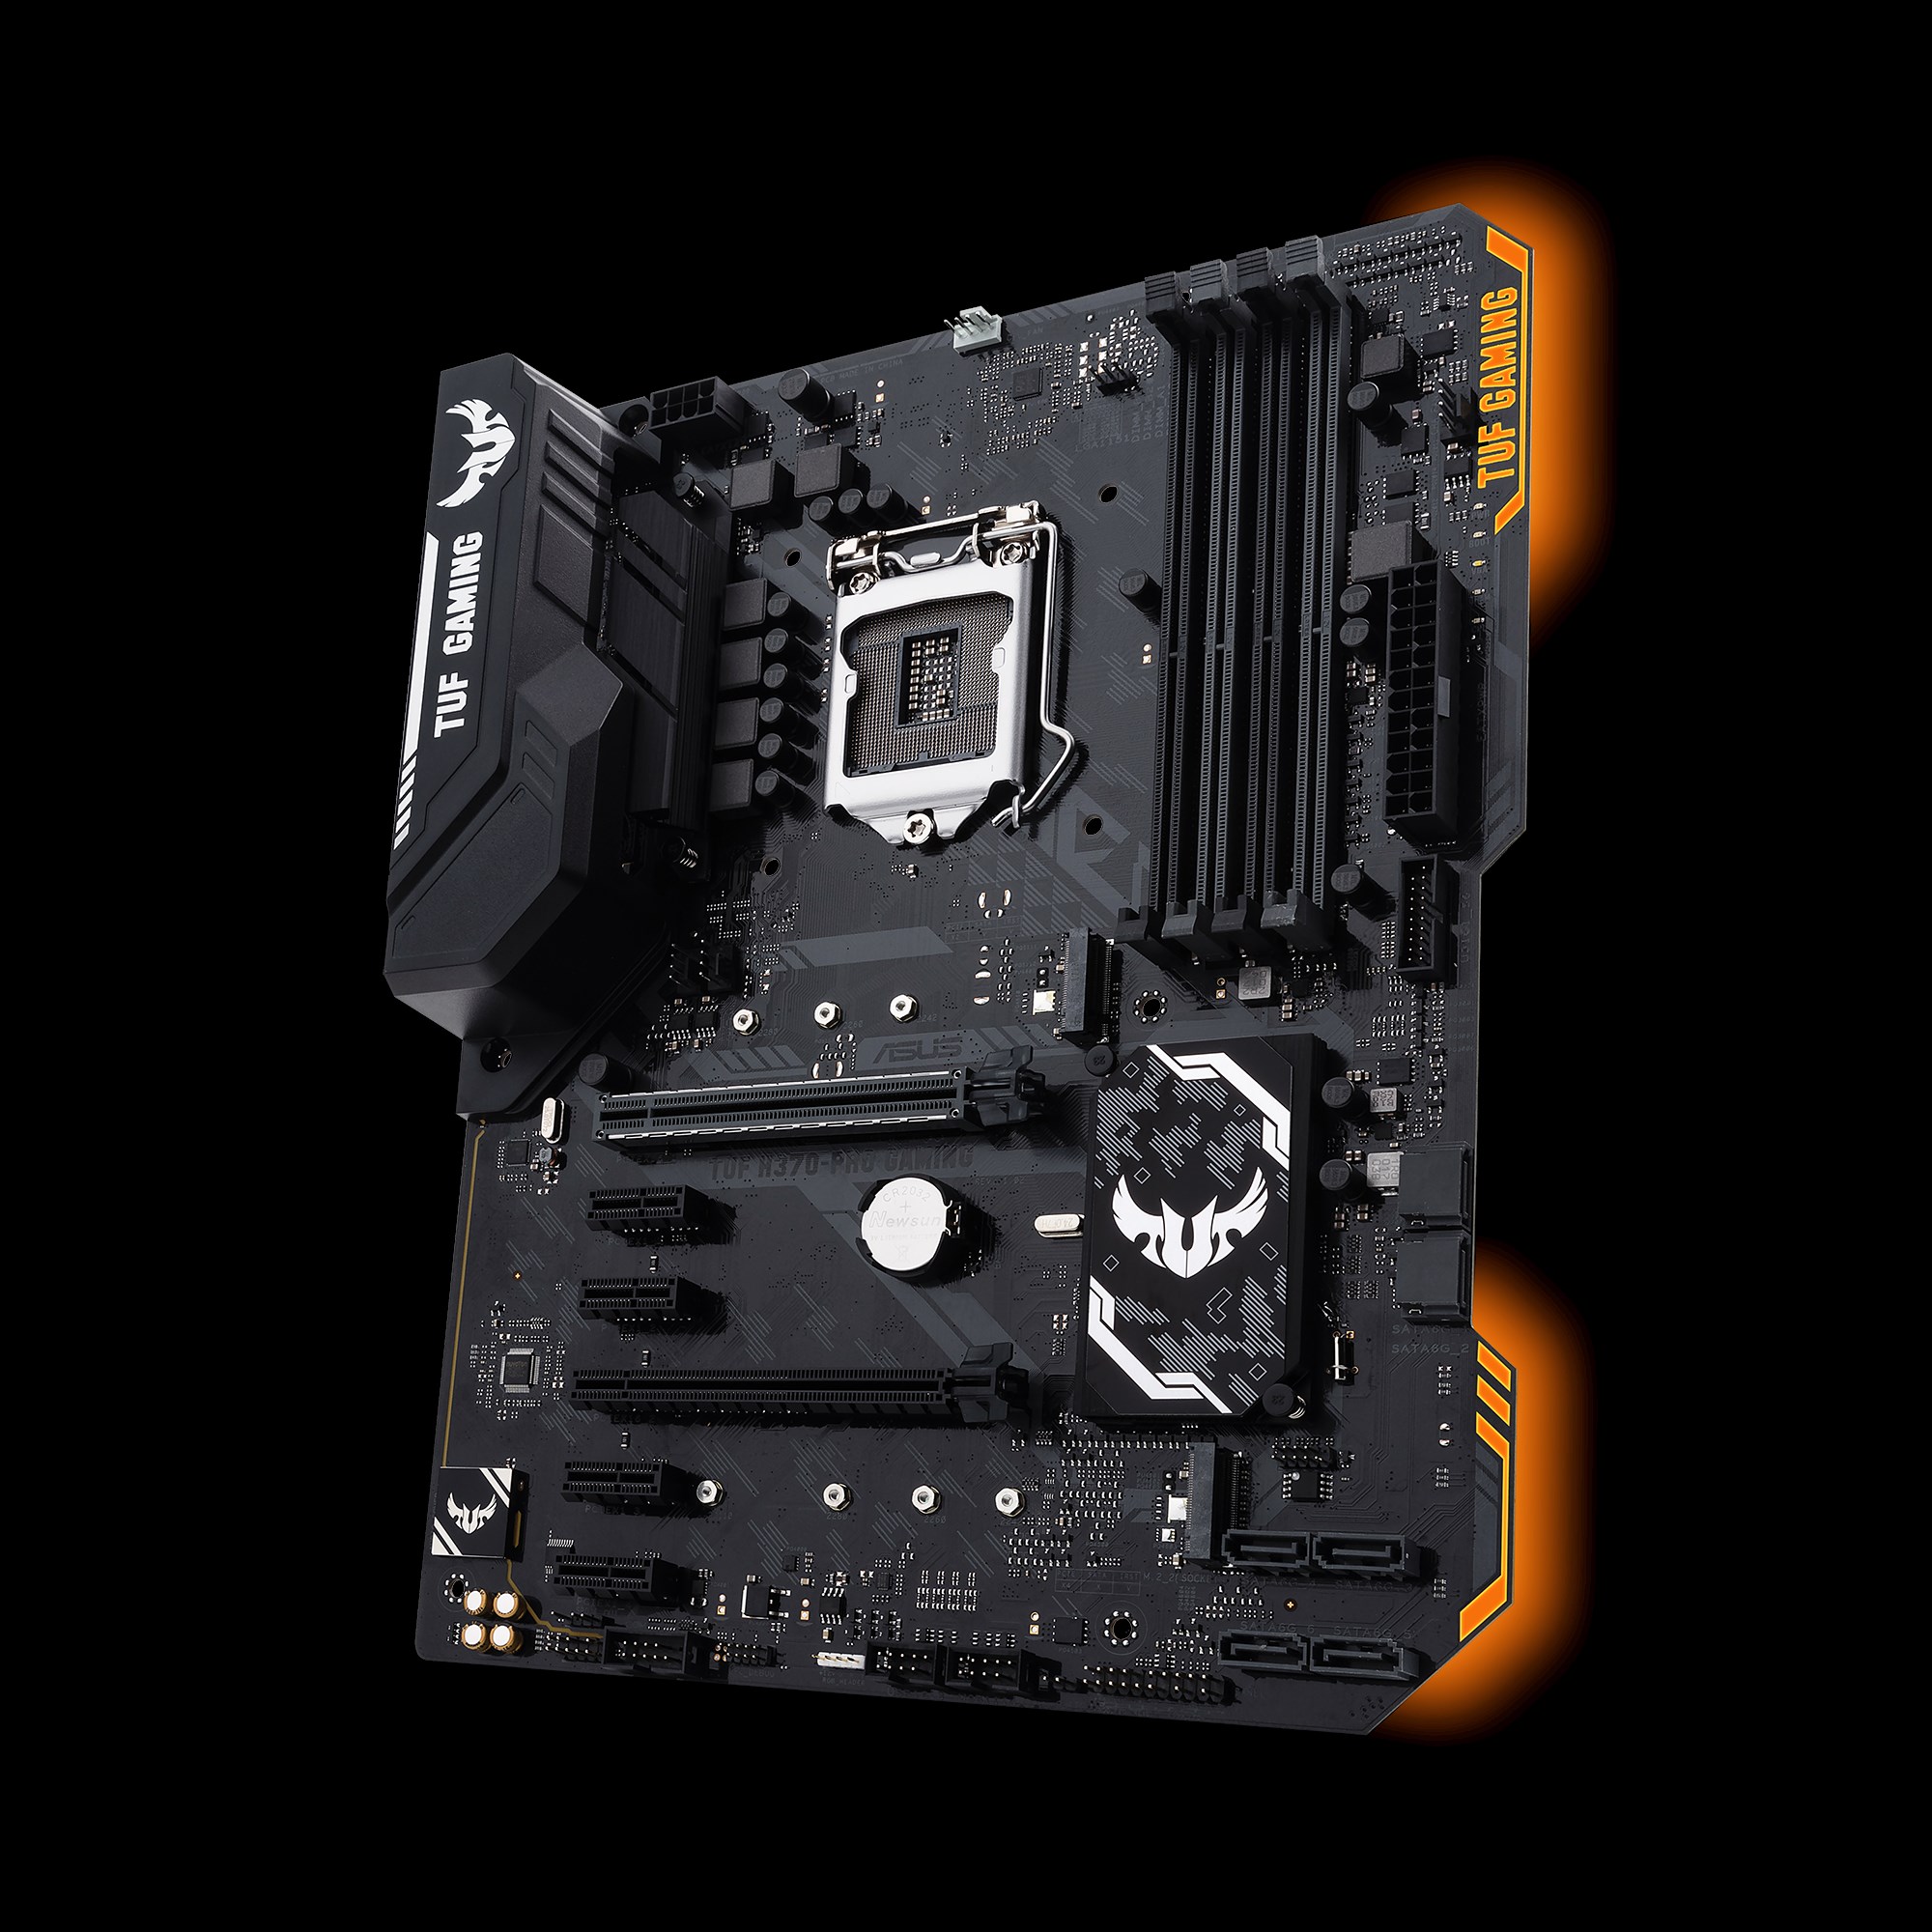 Asus Tuf H370 Pro Gaming Motherboard Specifications On Motherboarddb